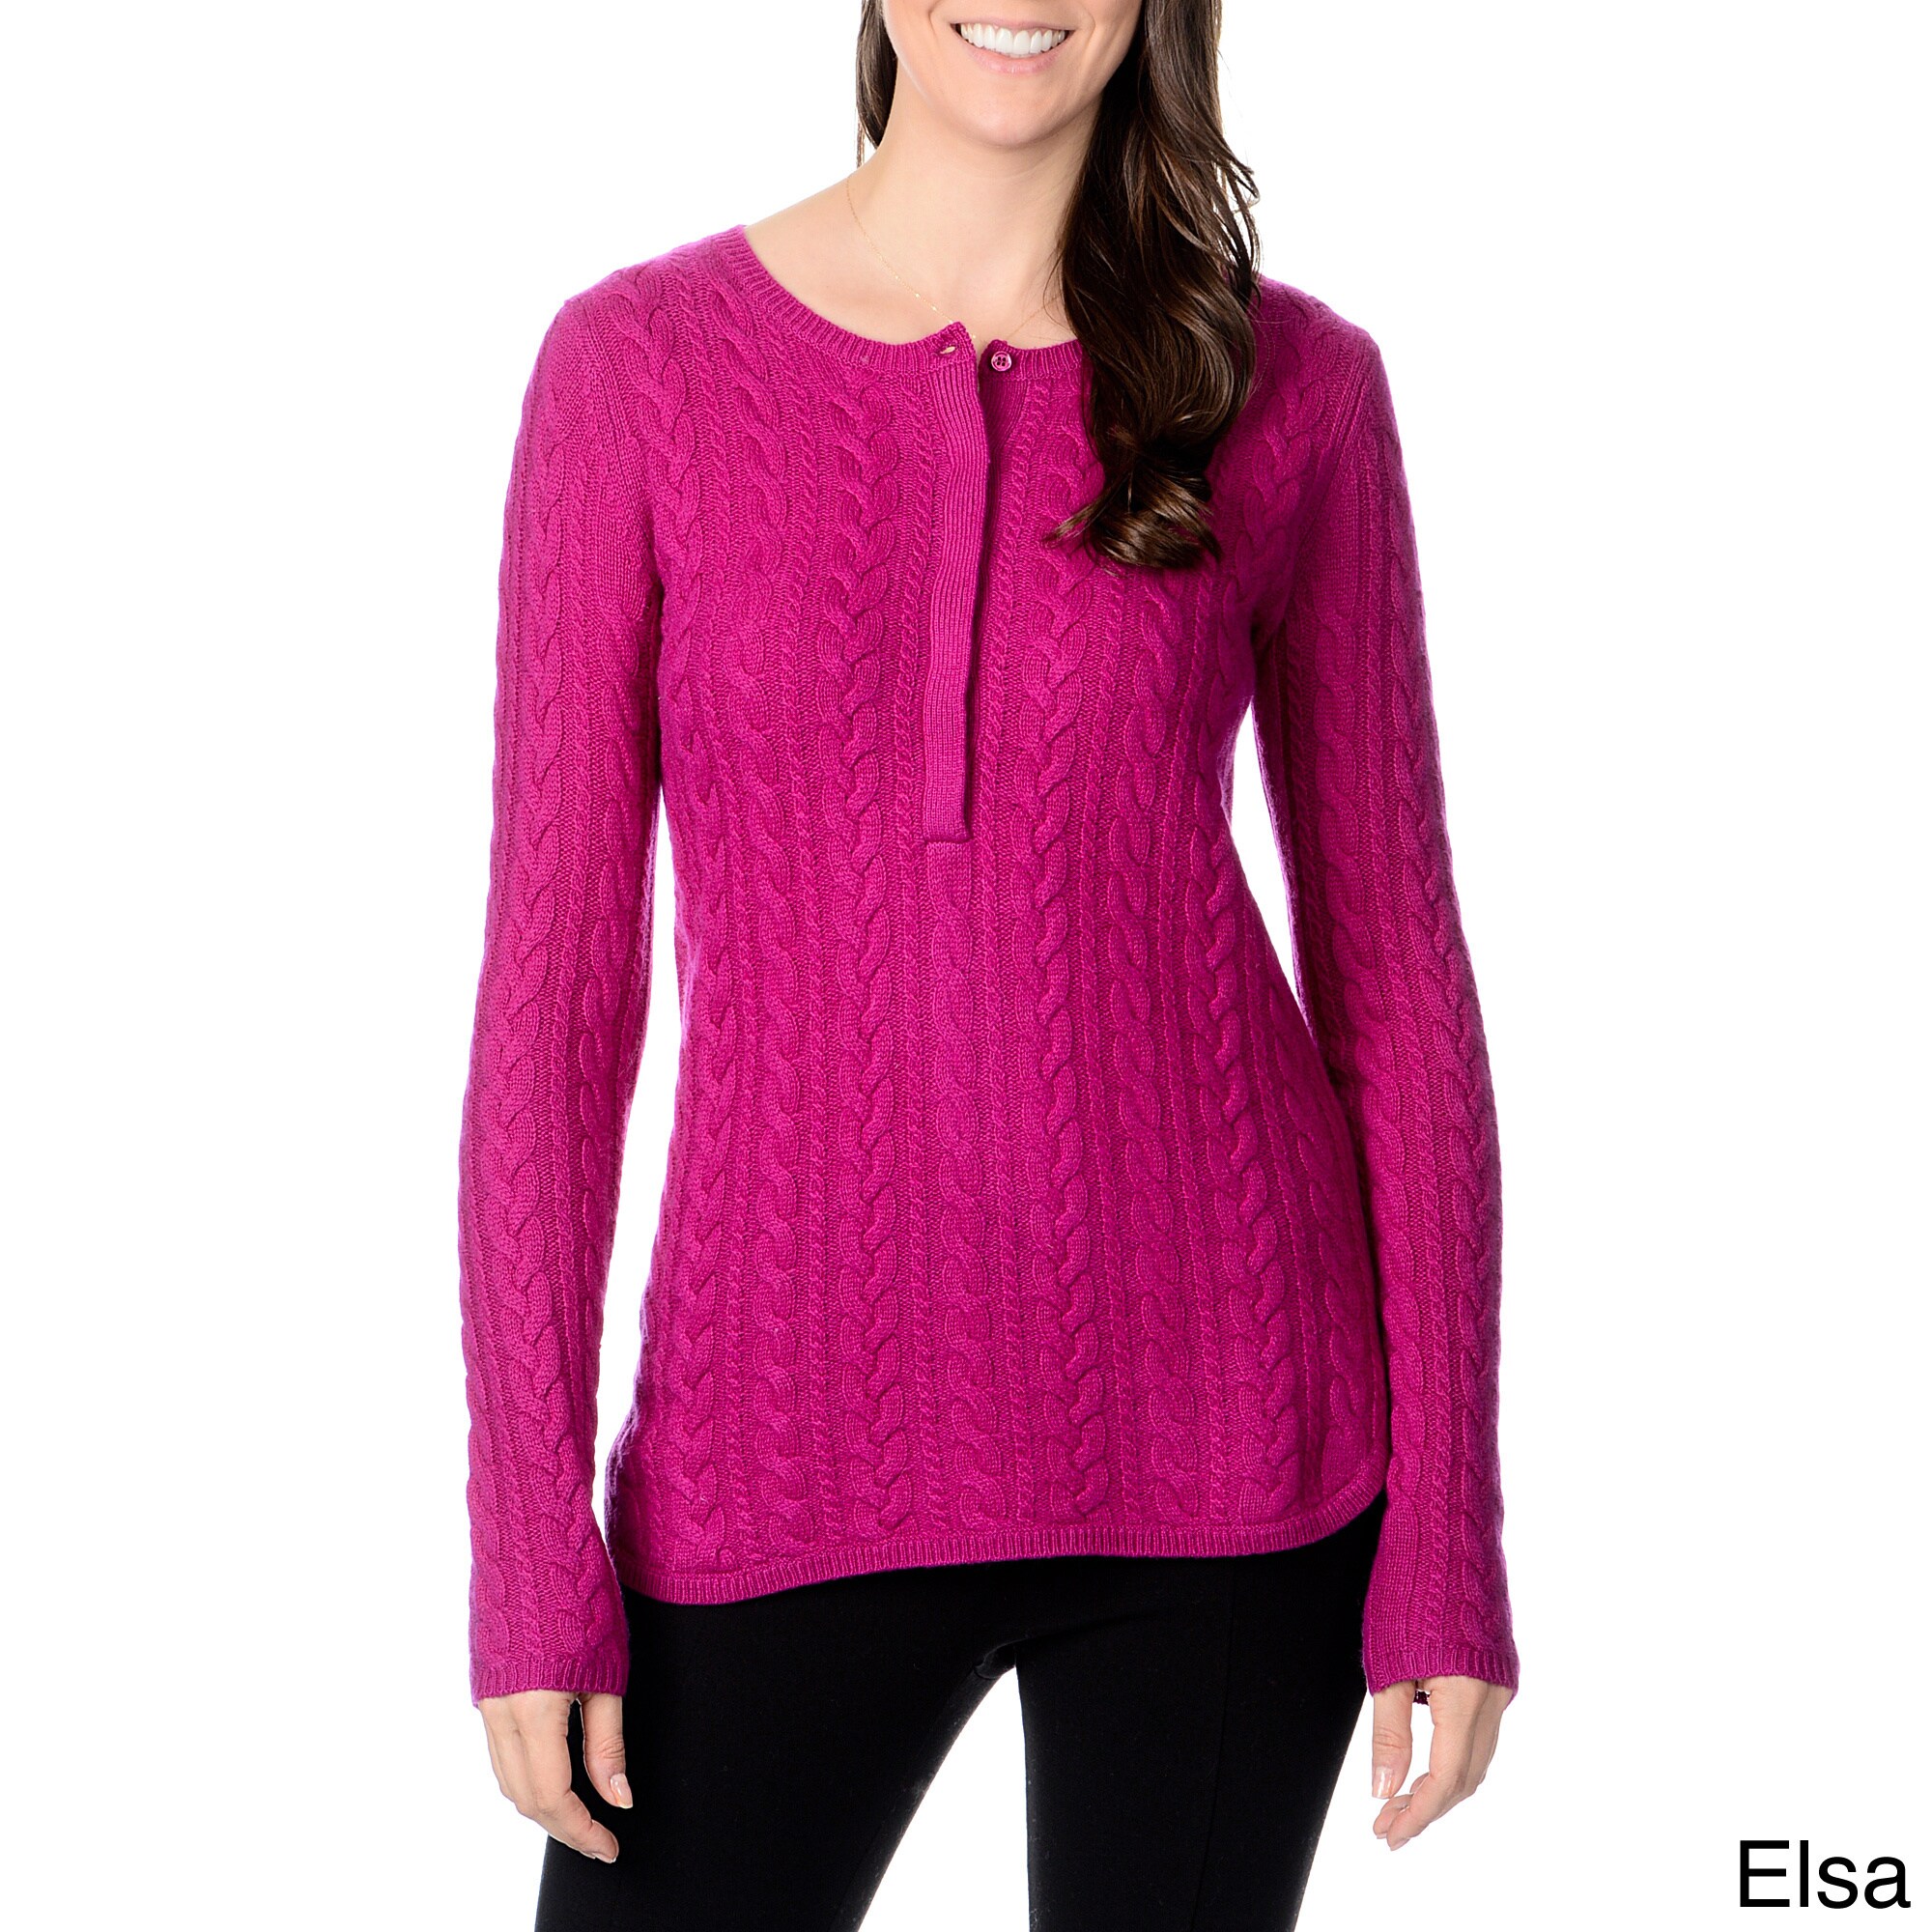 Ply Cashmere Ply Cashmere Womens Cable Knit Sweater Pink Size XS (2  3)